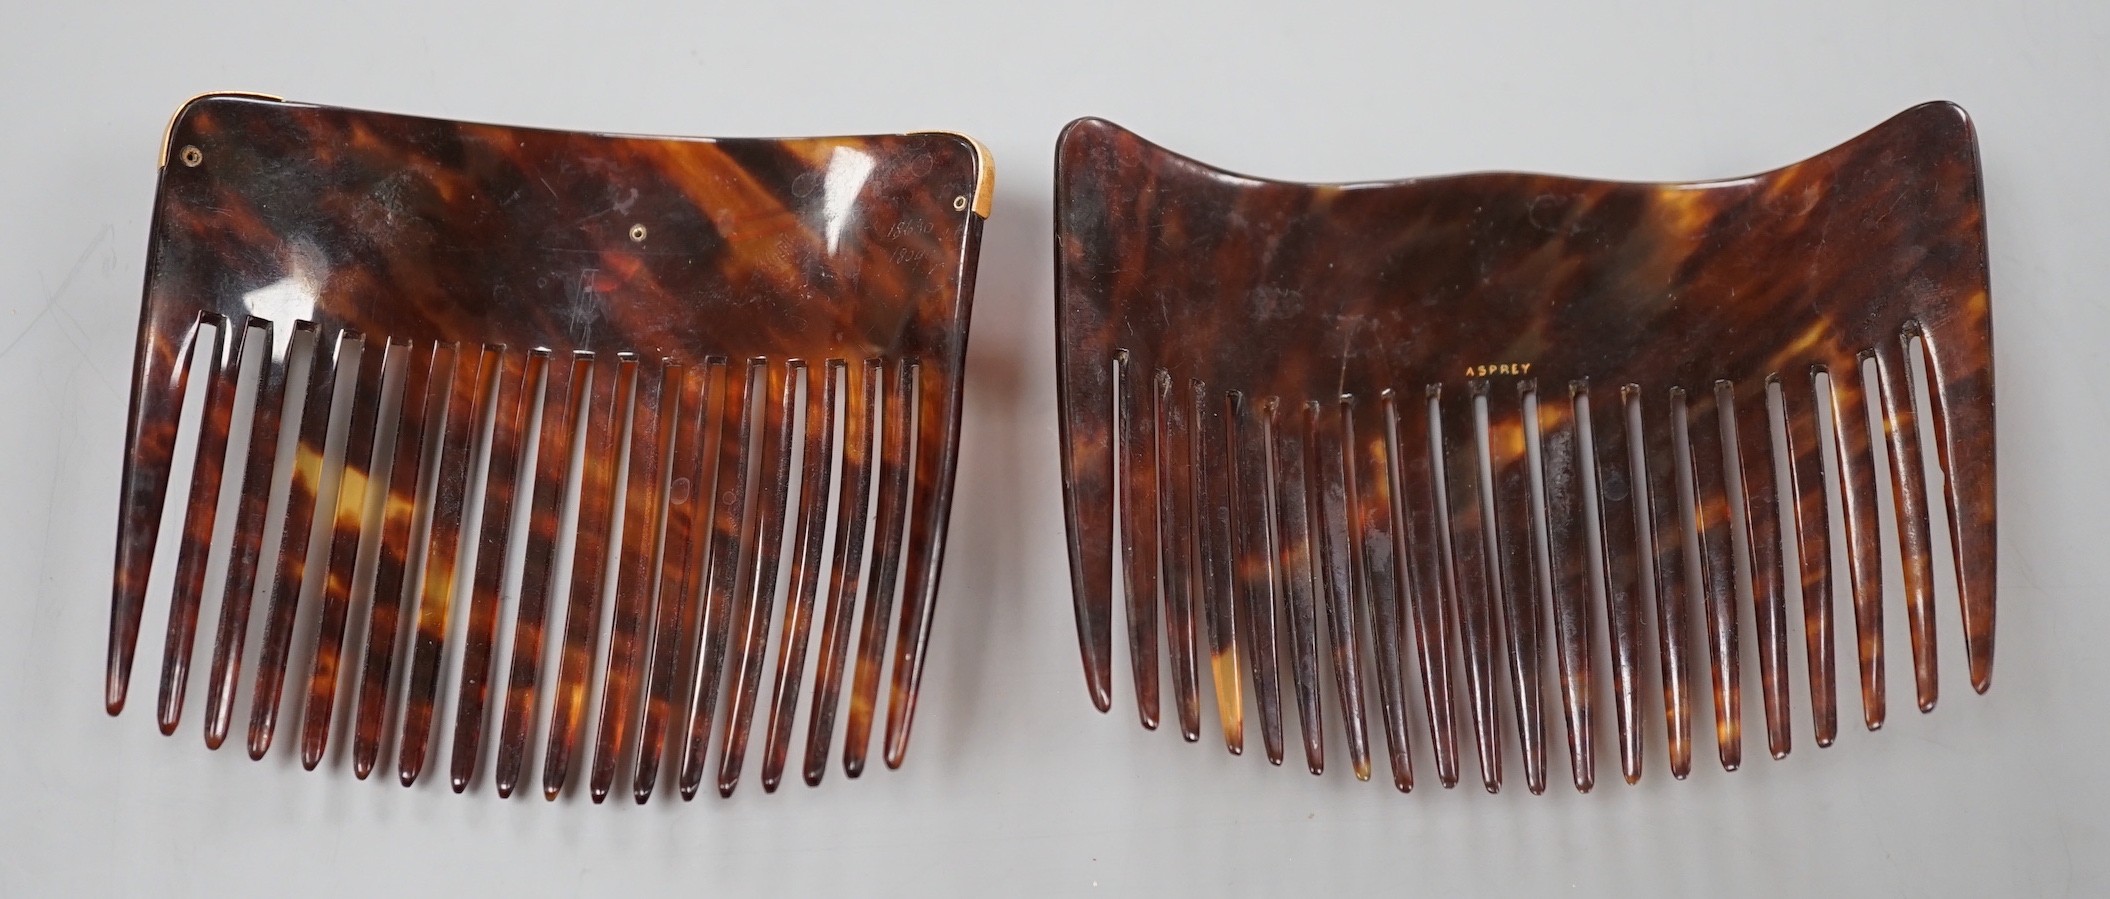 An early 20th century 9ct and mother of pearl mounted tortoiseshell hair comb, by Murrle Bennett & Co, width 93mm and one other tortoiseshell hair comb by Asprey.